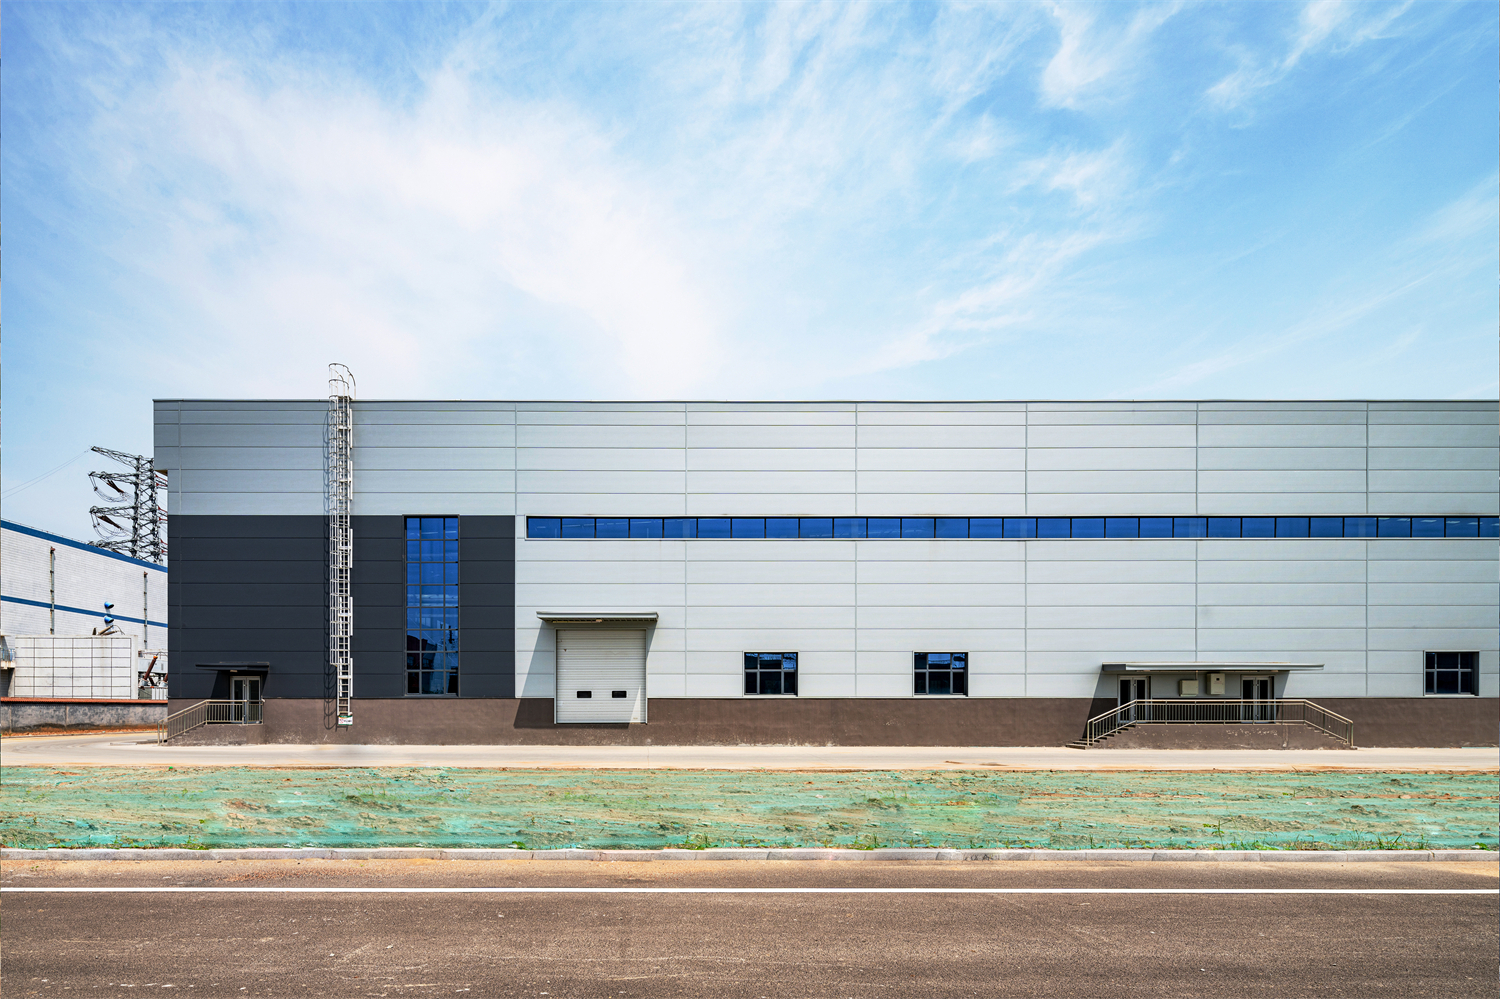 With equal emphasis on function and beauty, green building materials help the construction of logistics center(图9)